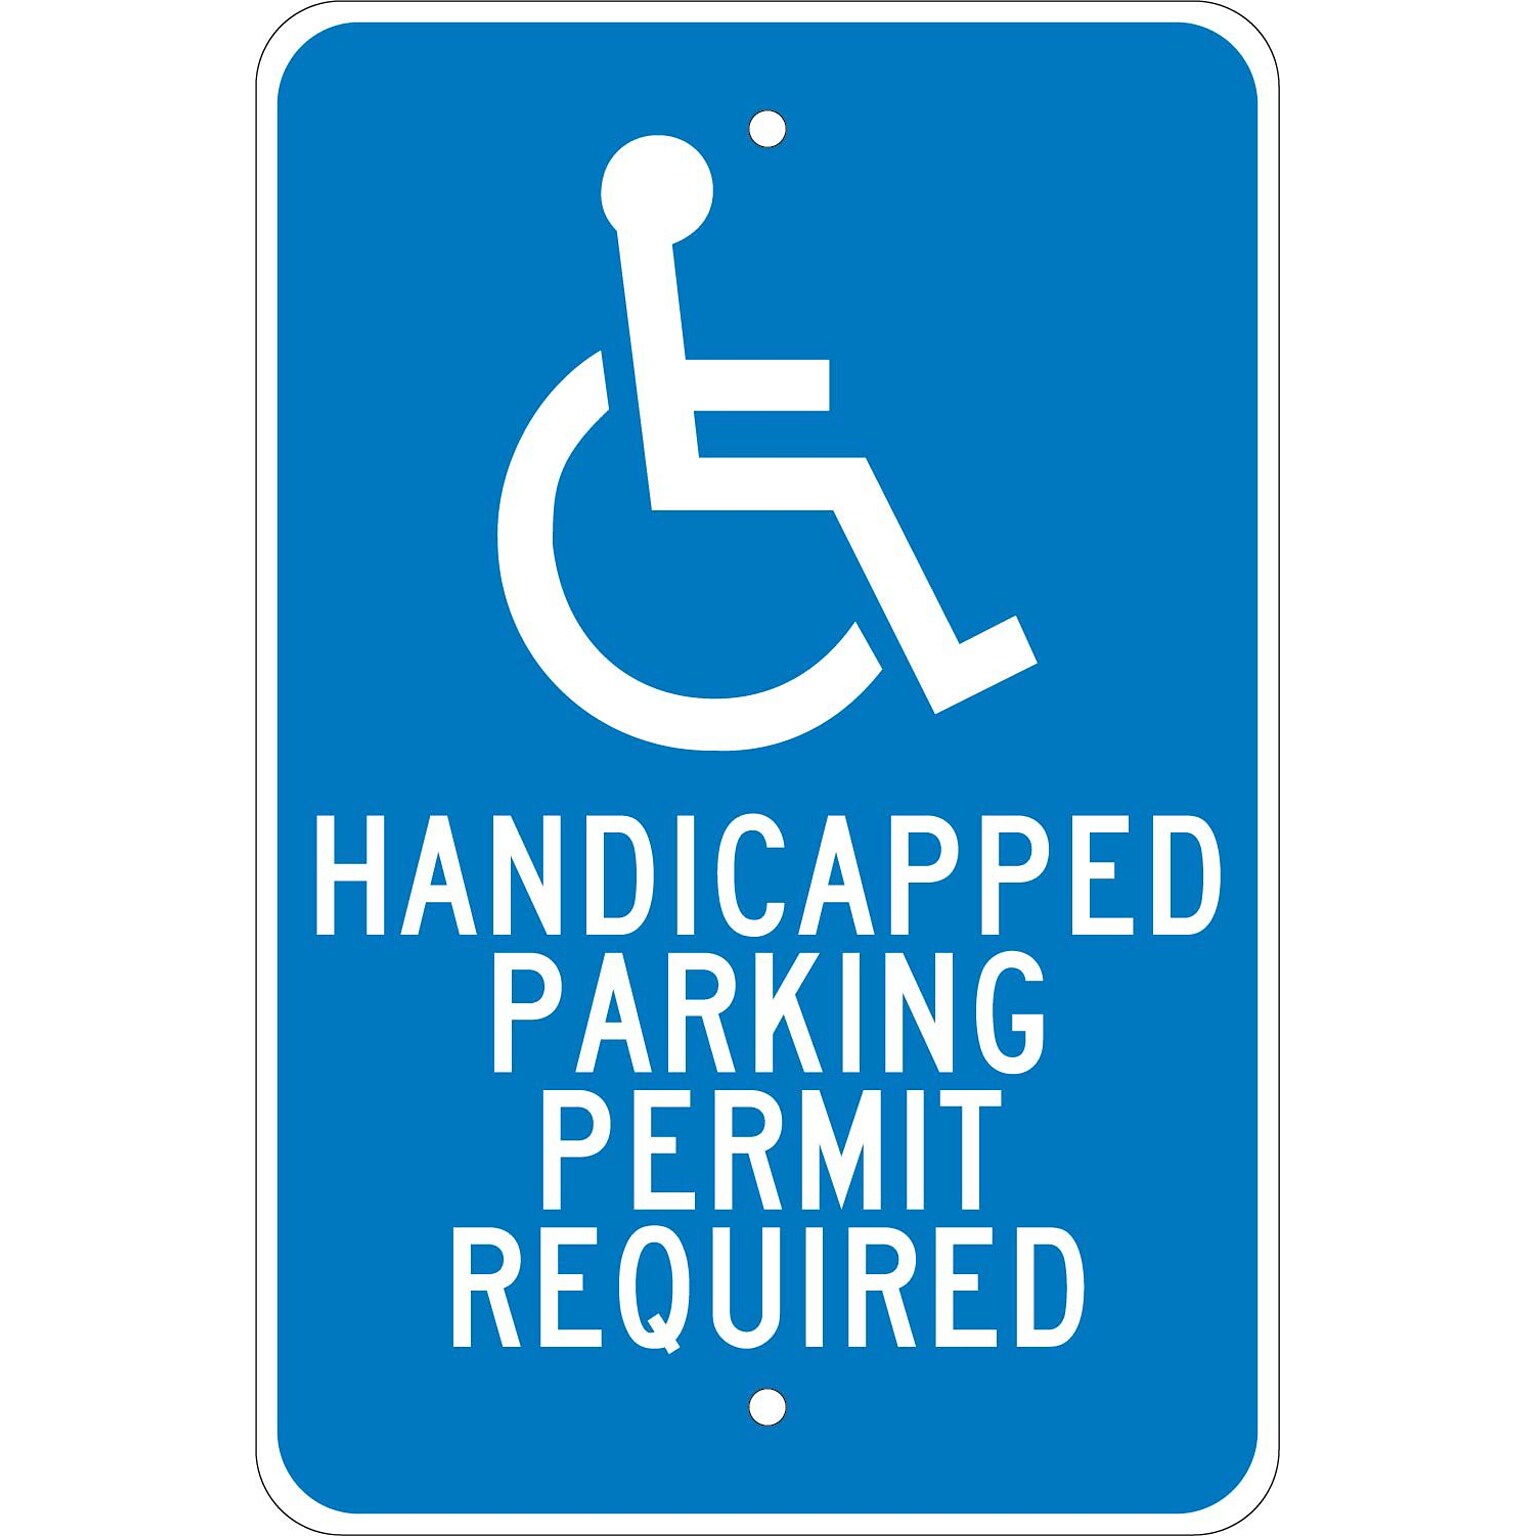 National Marker Reflective Handicapped Parking Permit Required Parking Sign, 18 x 12, Aluminum (TM84J)